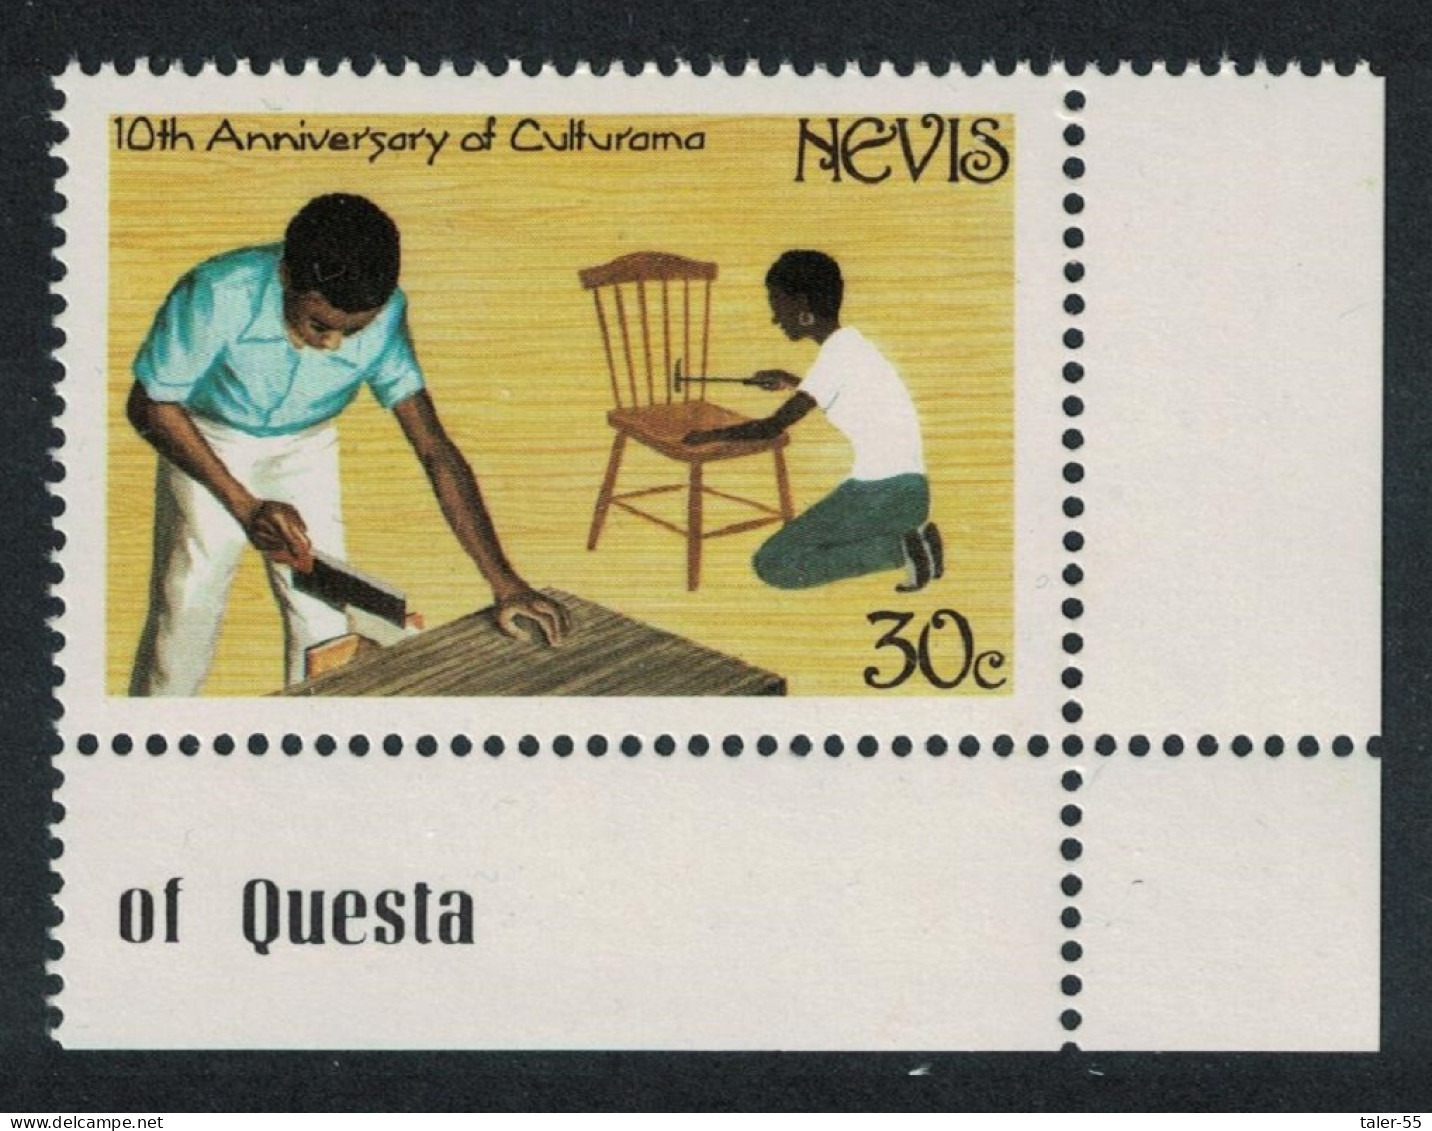 Nevis Carpentry Local Industries Corner 1984 MNH SG#181 - St.Kitts And Nevis ( 1983-...)